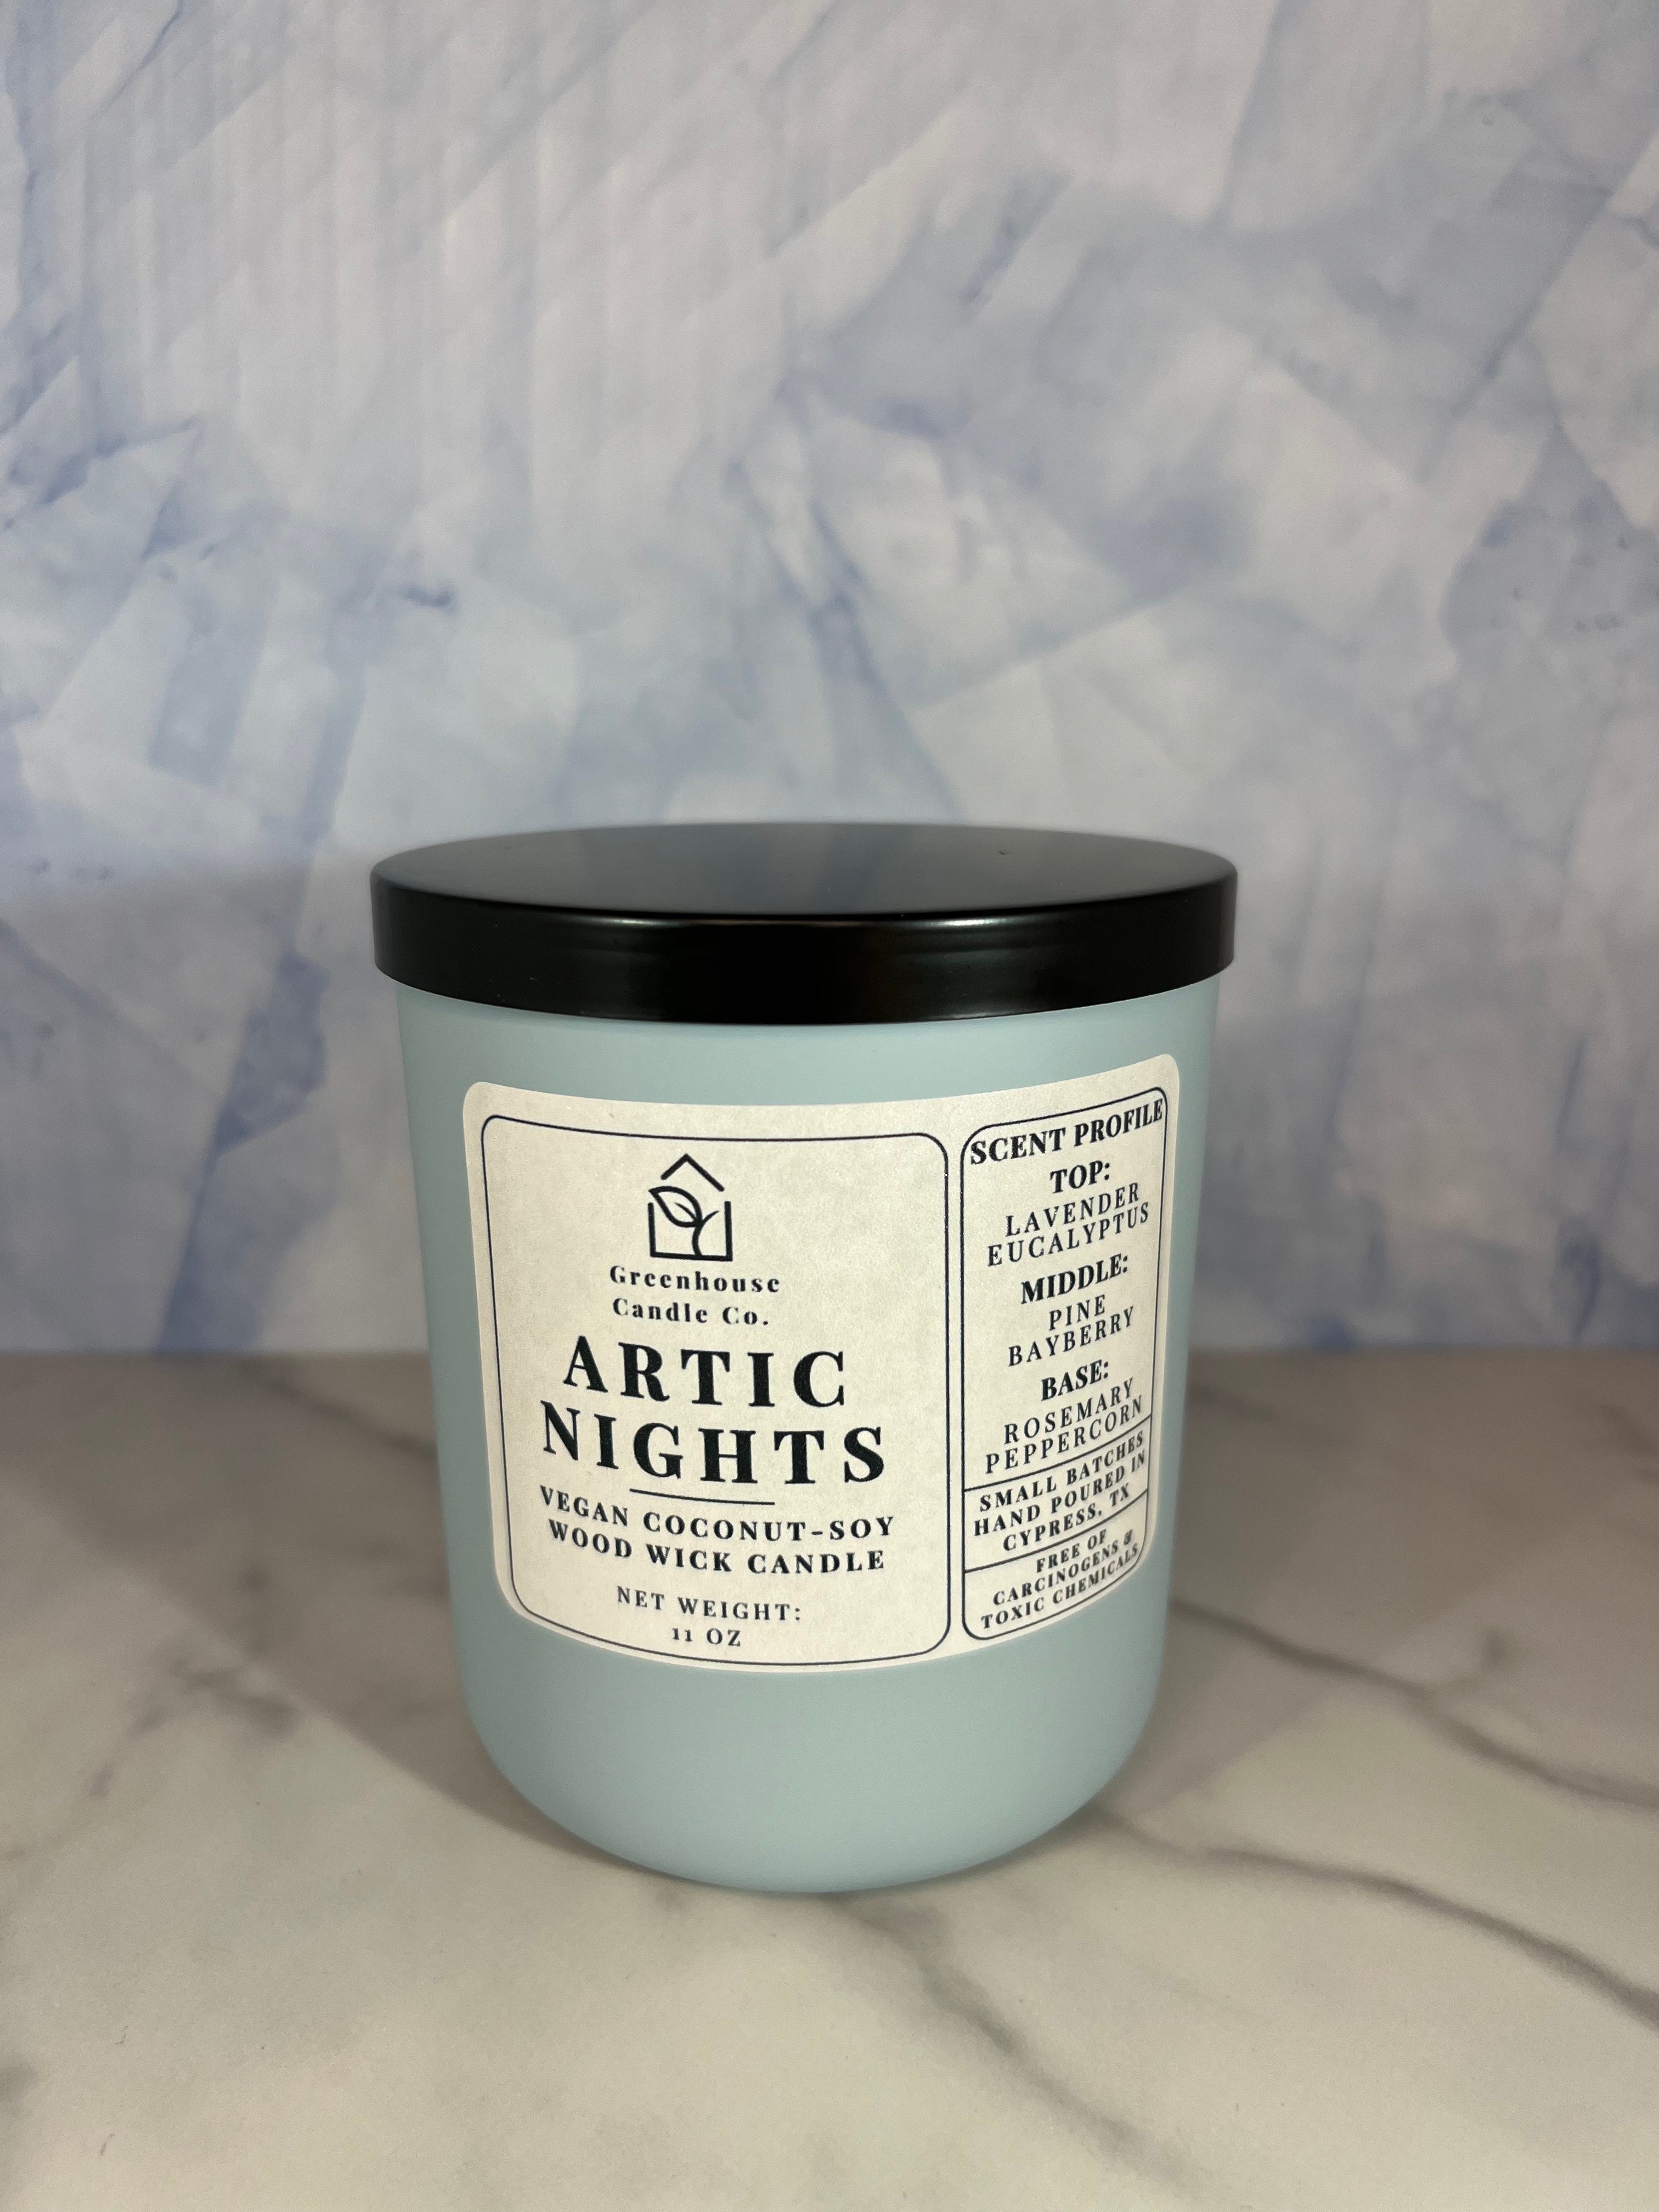 Artic Nights - Greenhouse Candle Co. - 